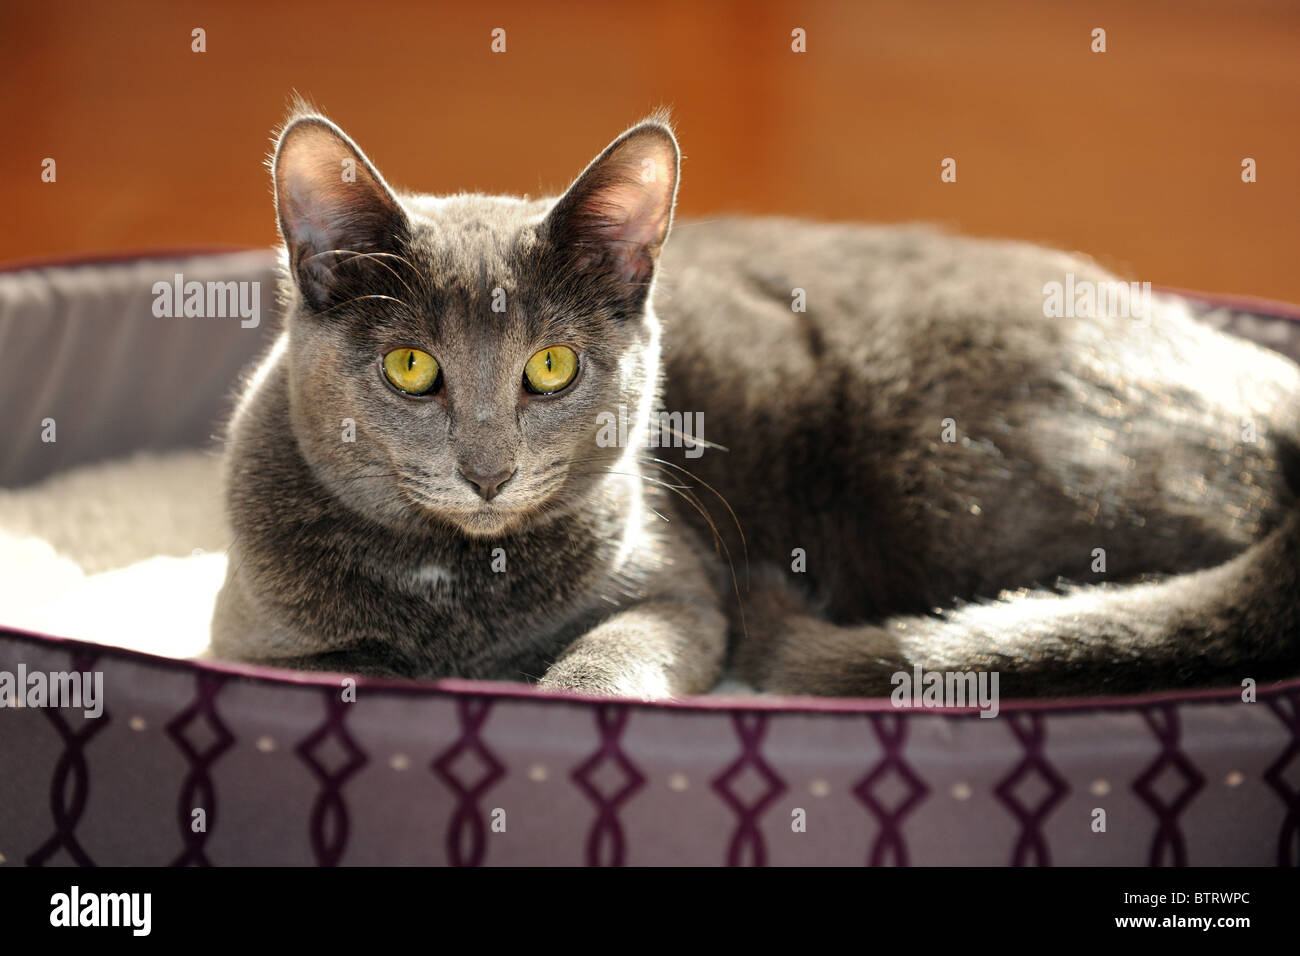 Cat resting on bed Stock Photo